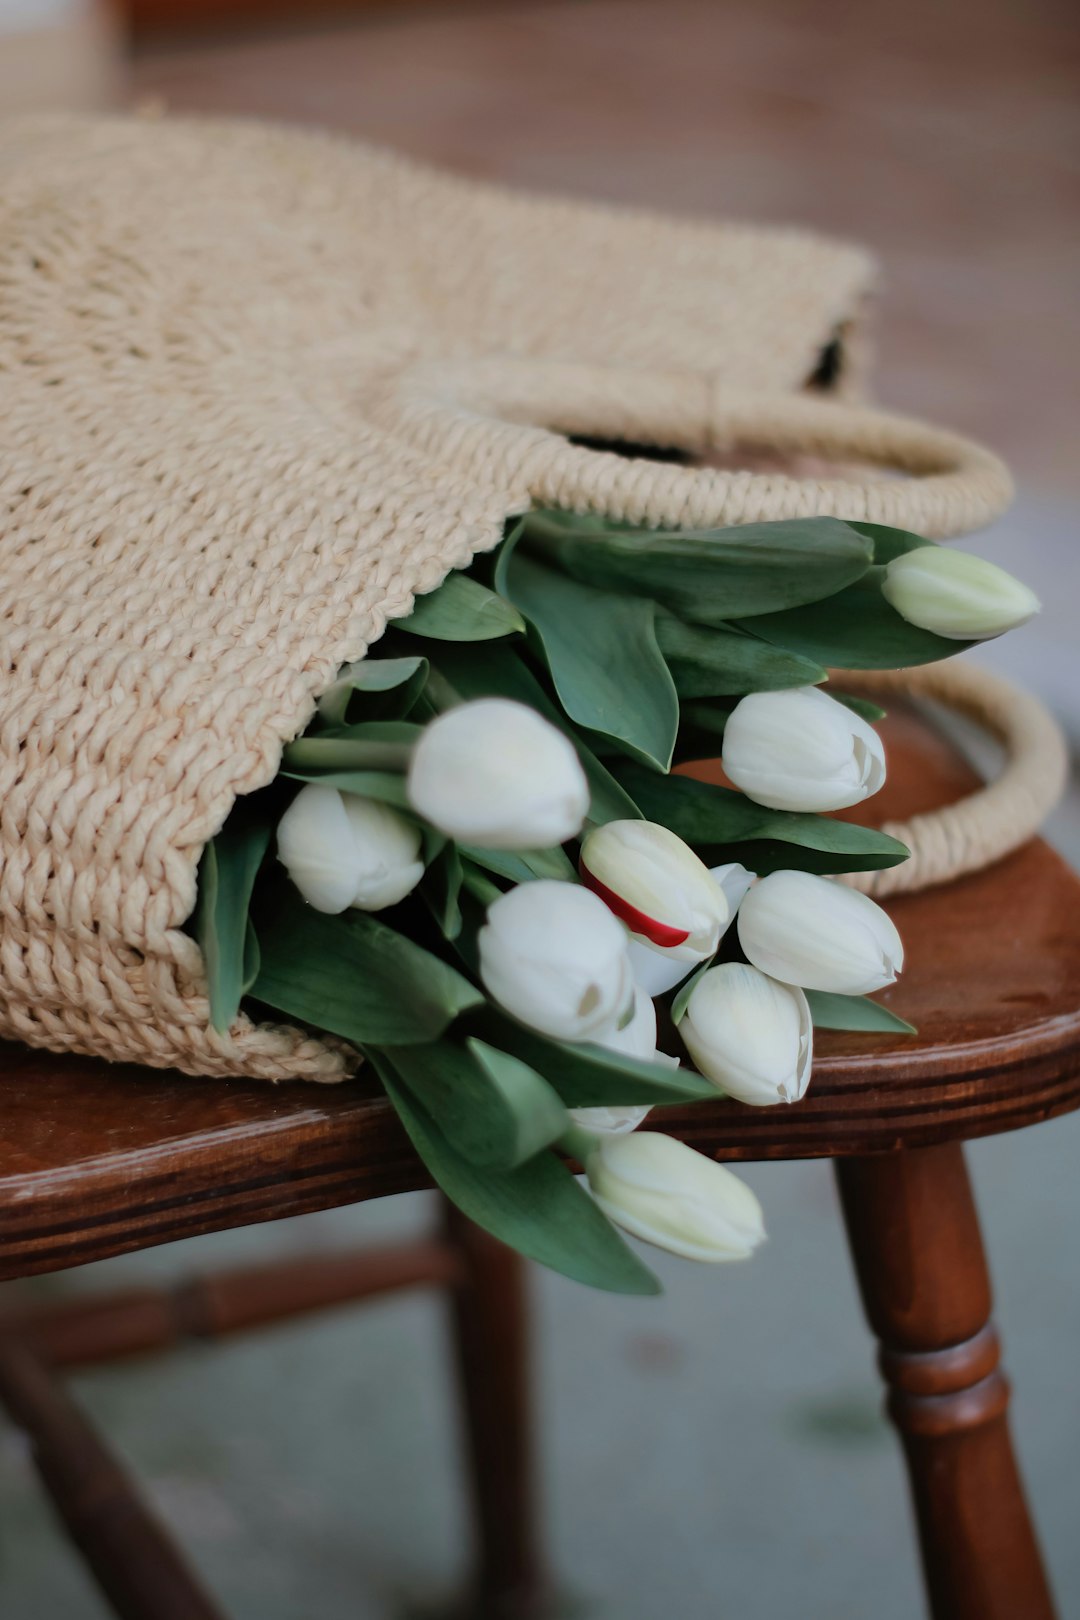 white tulips on brown wooden table